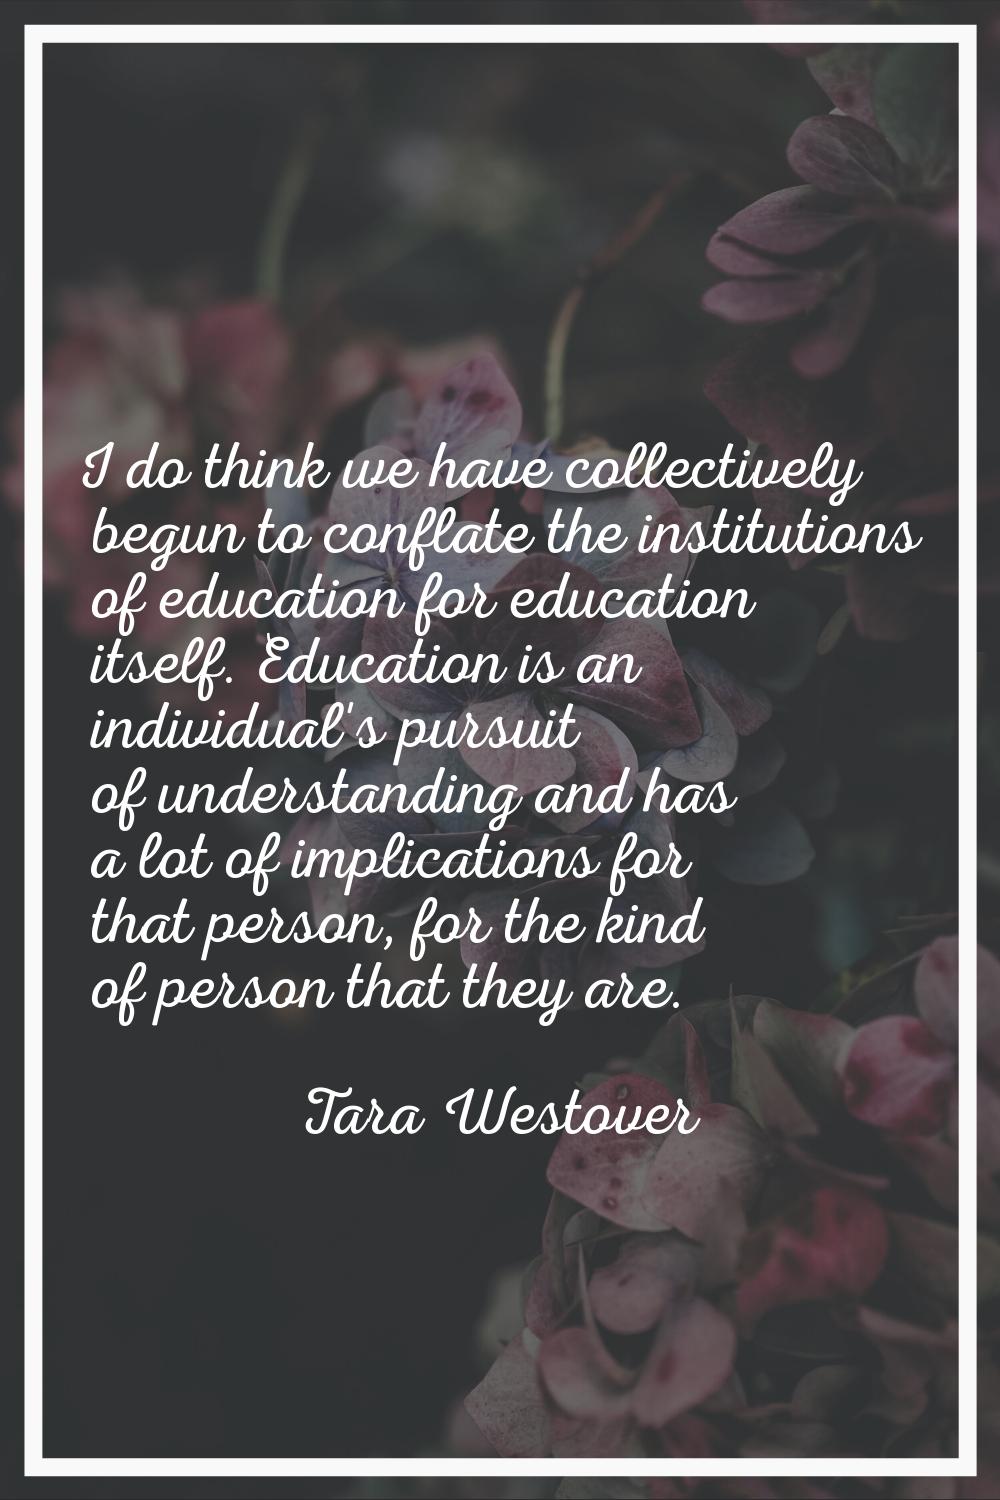 I do think we have collectively begun to conflate the institutions of education for education itsel